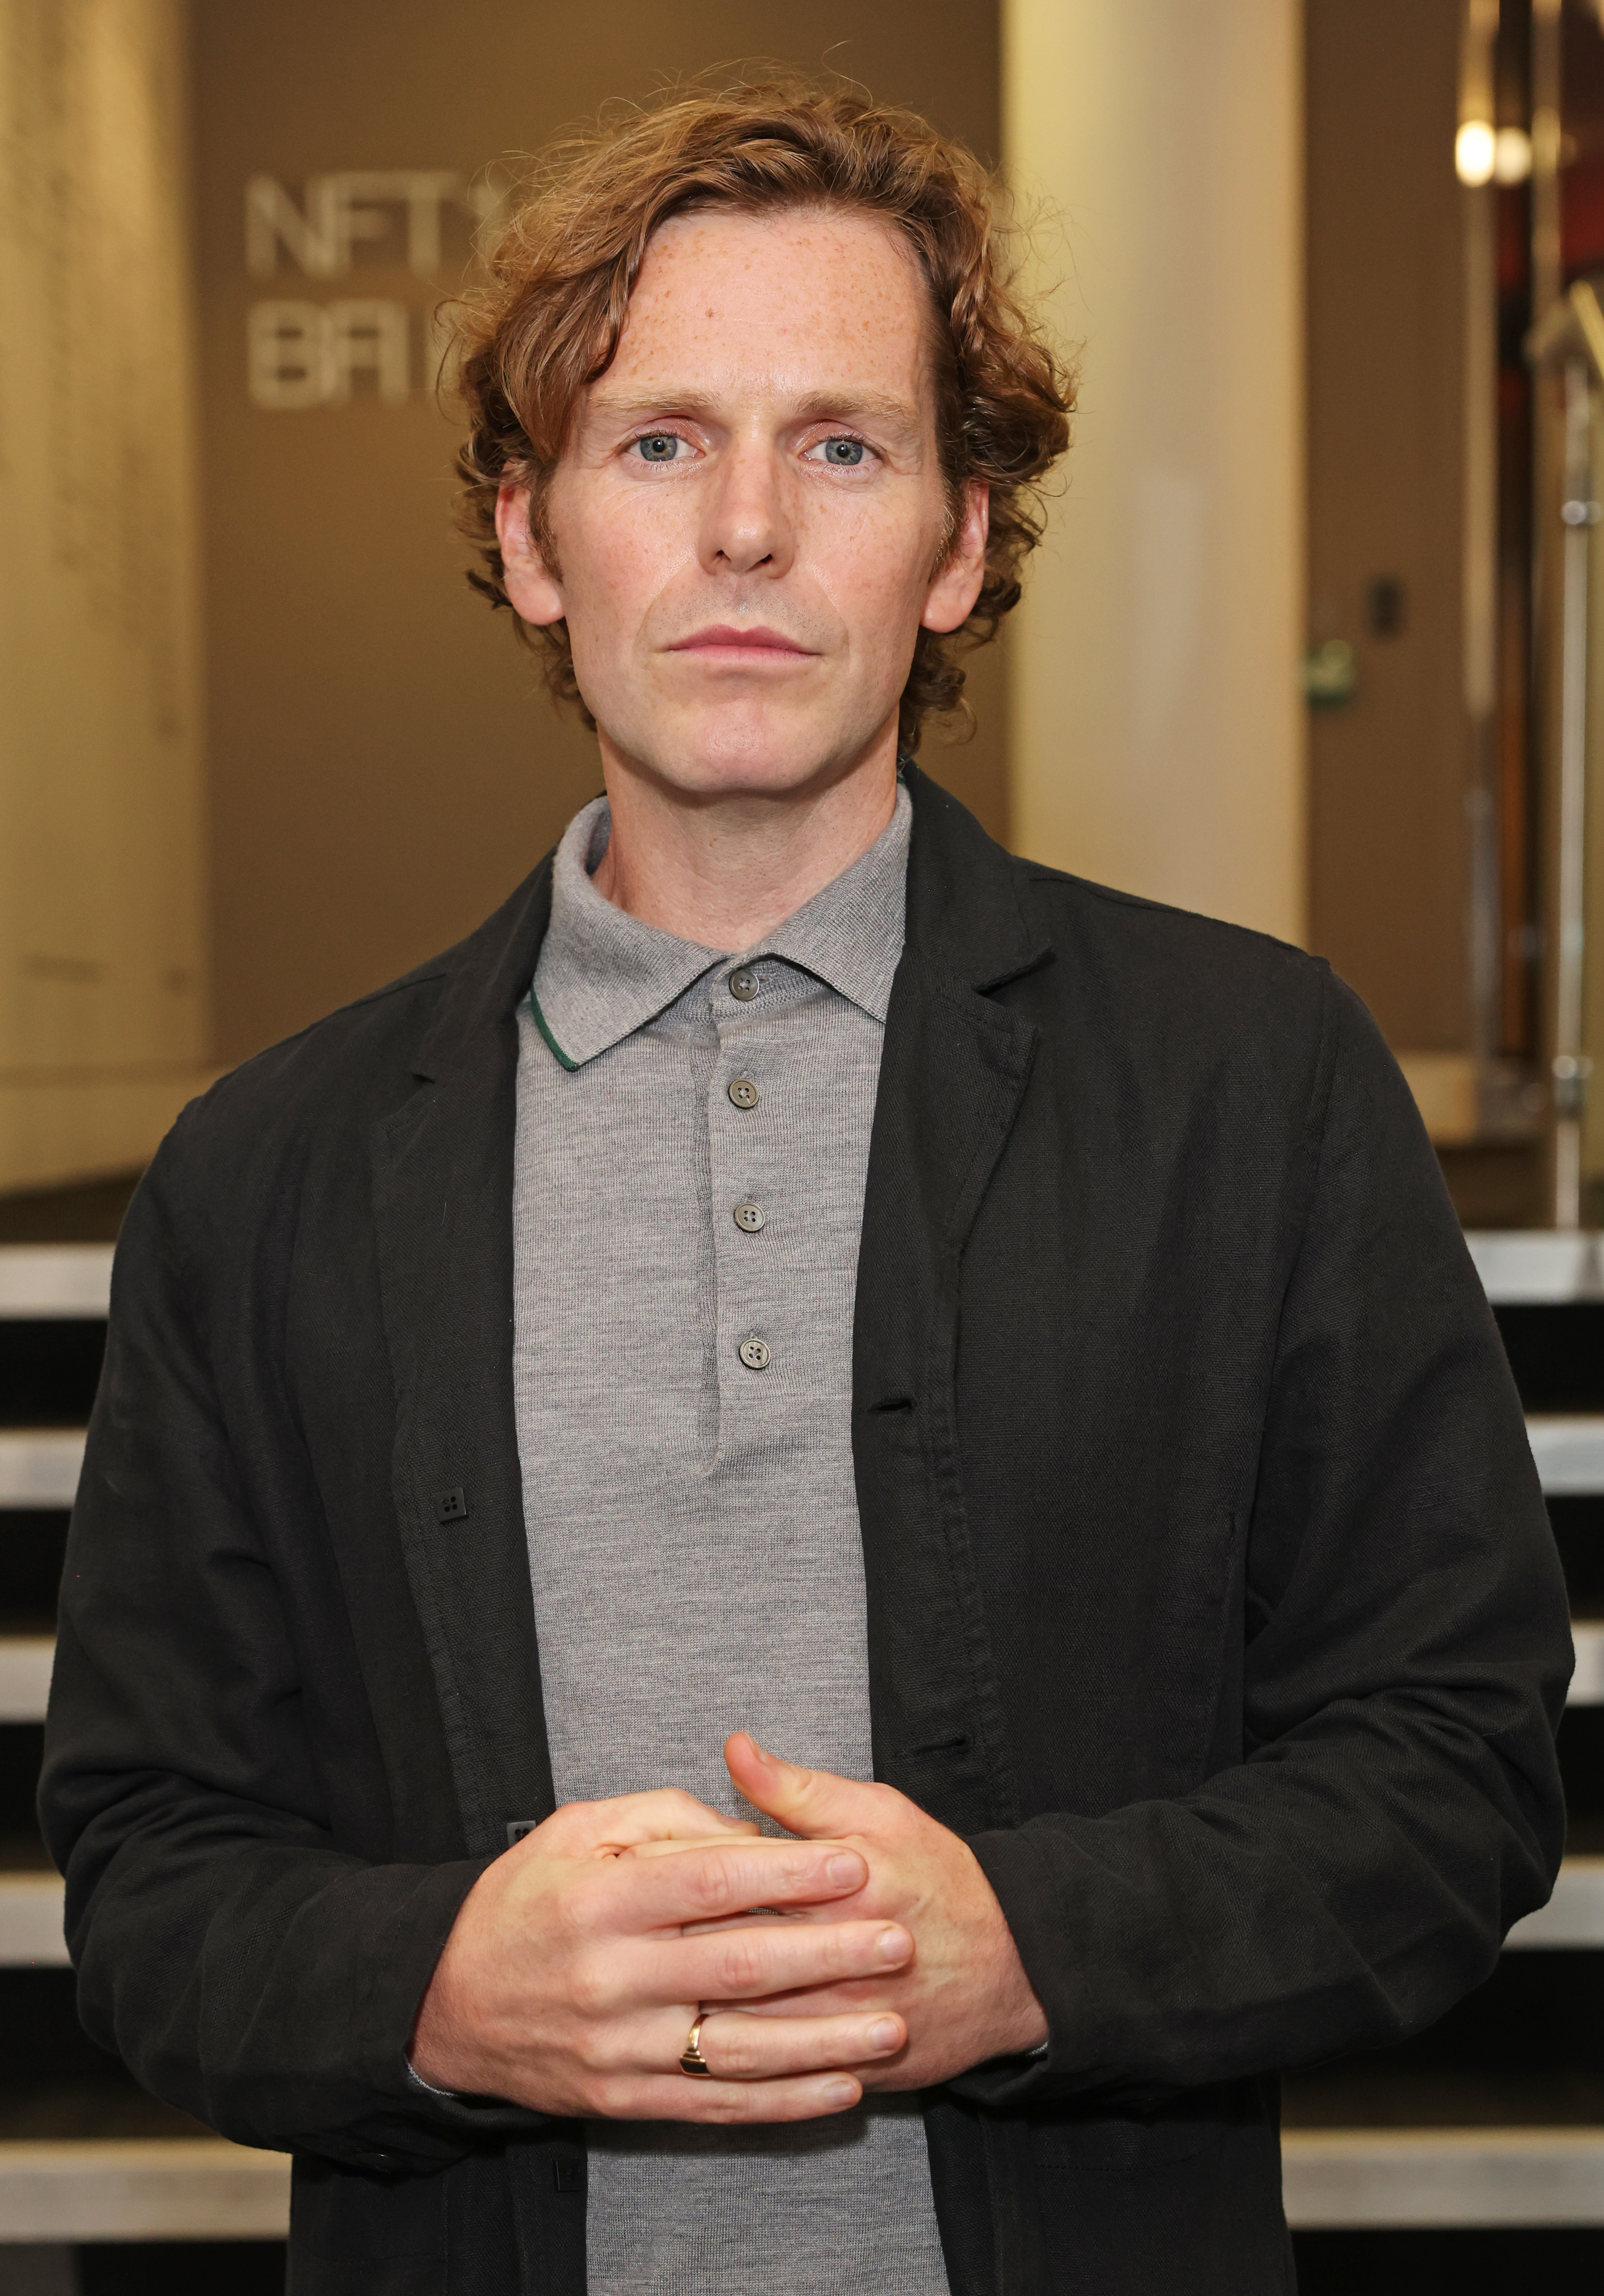 Shaun Evans attends the BFI Southbank premiere screening of new BBC drama "Vigil" on August 23, 2021 in London, England | Source: Getty Images